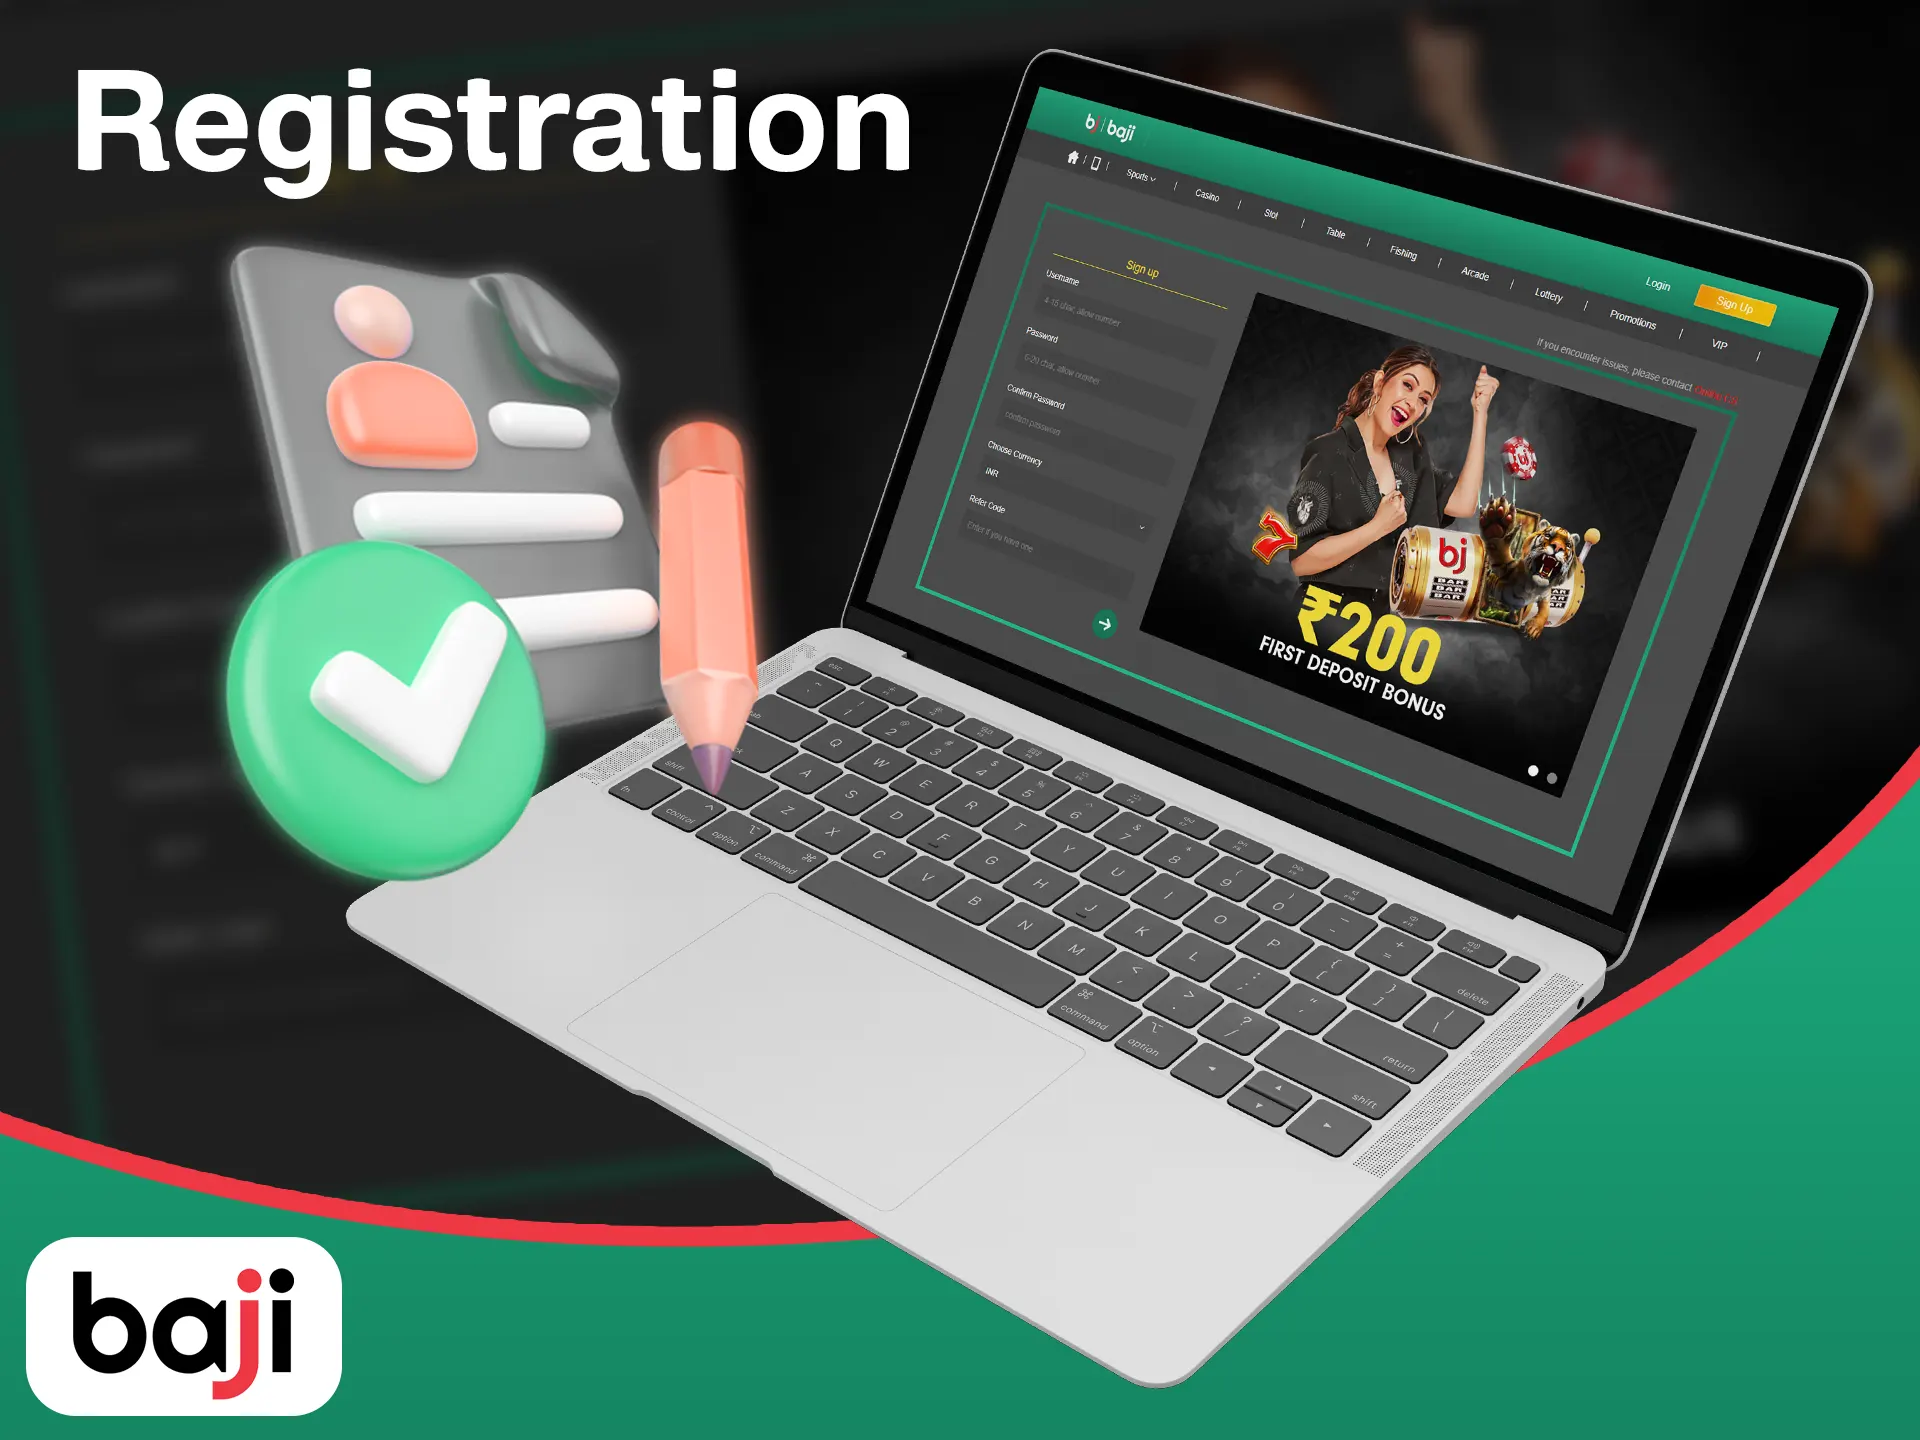 Register your own Baji India account on the registration page.